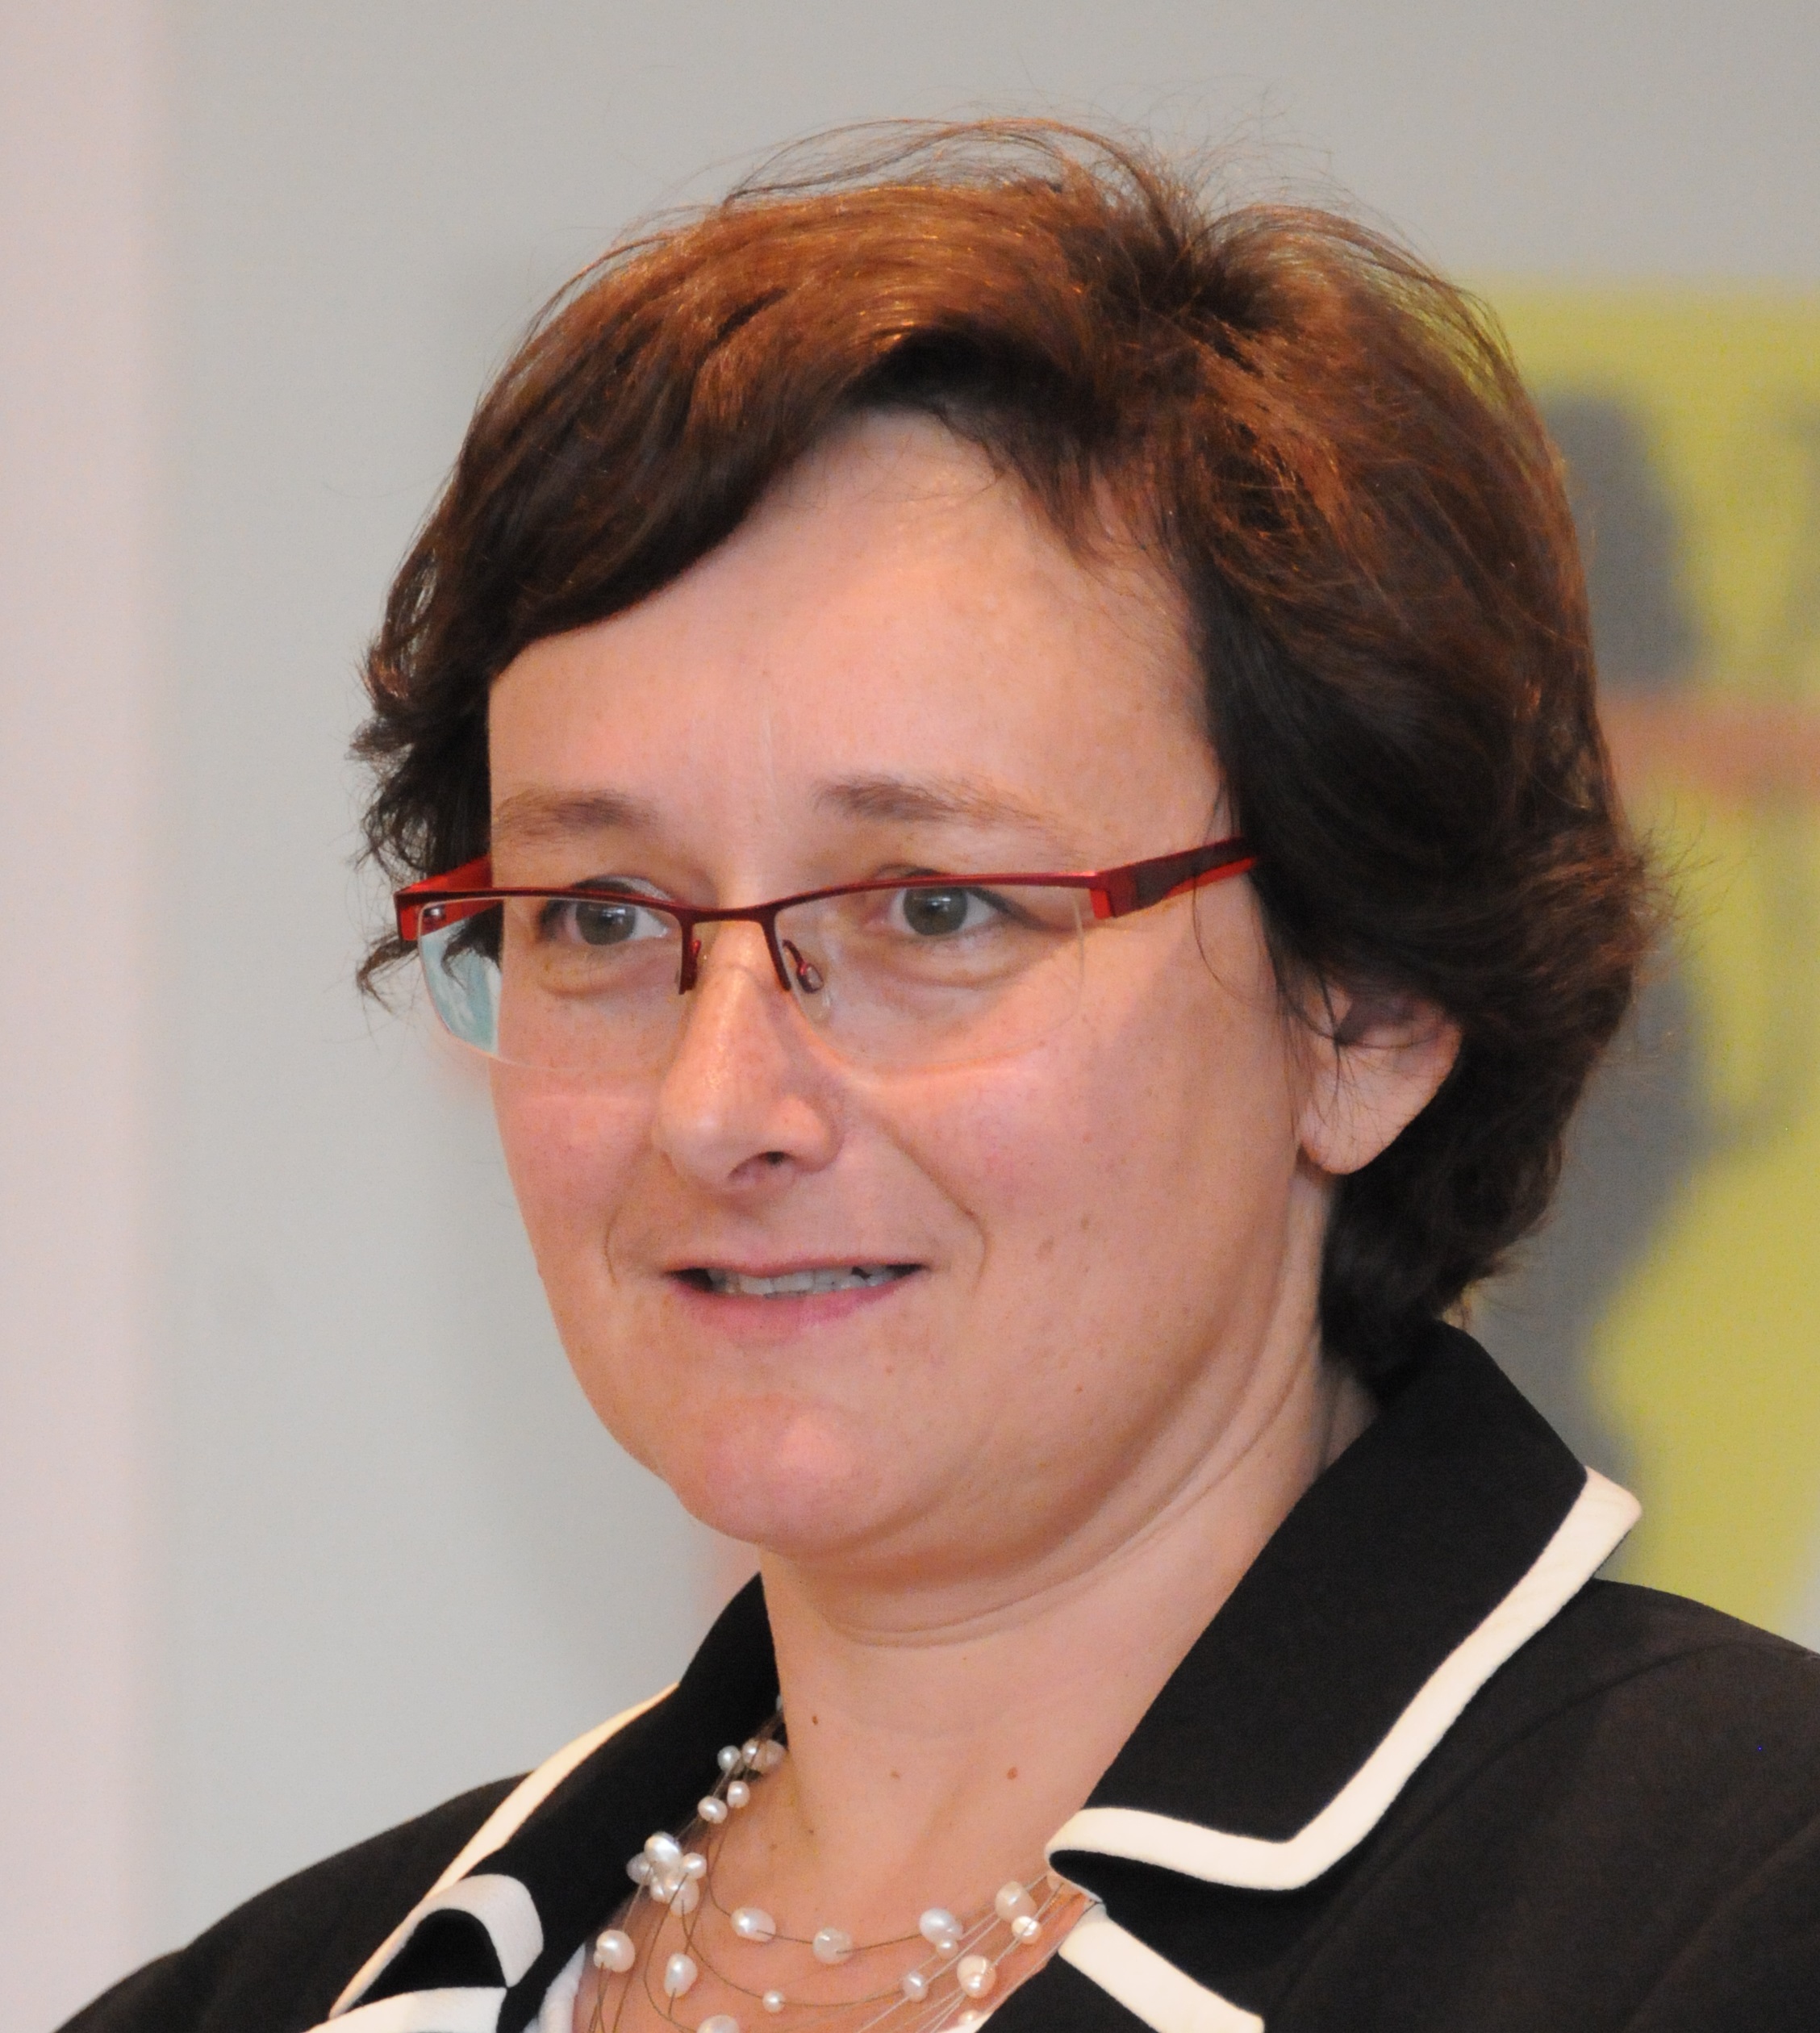 Prof. Dr. Maria A. Wimmer